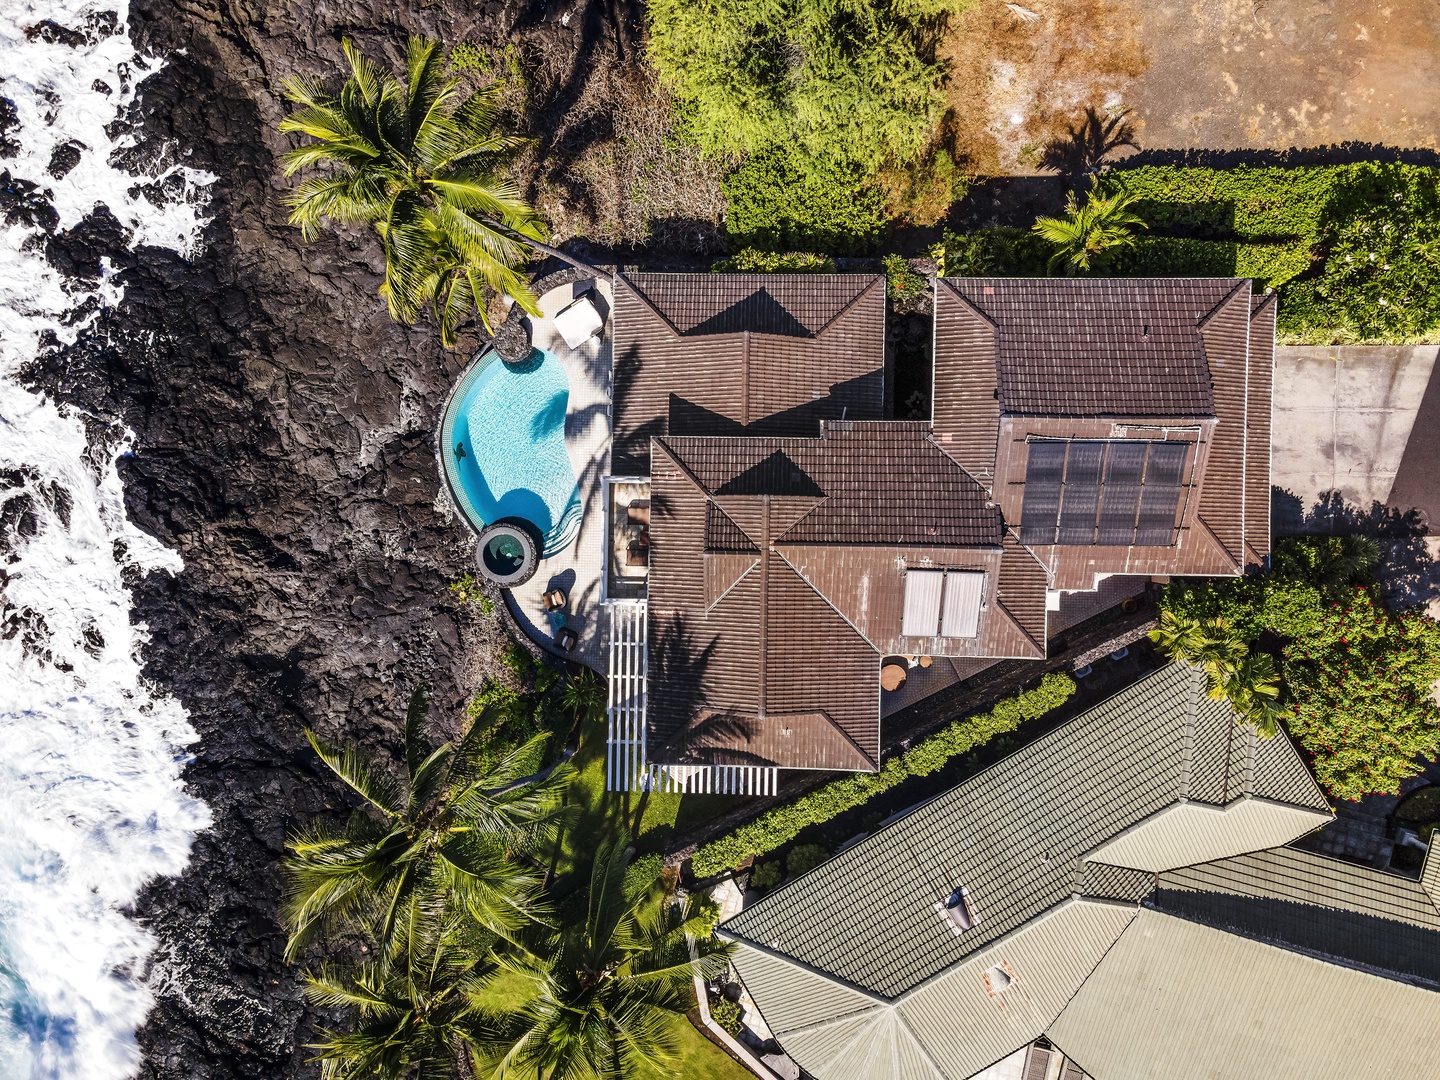 Kailua Kona Vacation Rentals, Ali'i Point #9 - Aerial view of the home in the private gated community